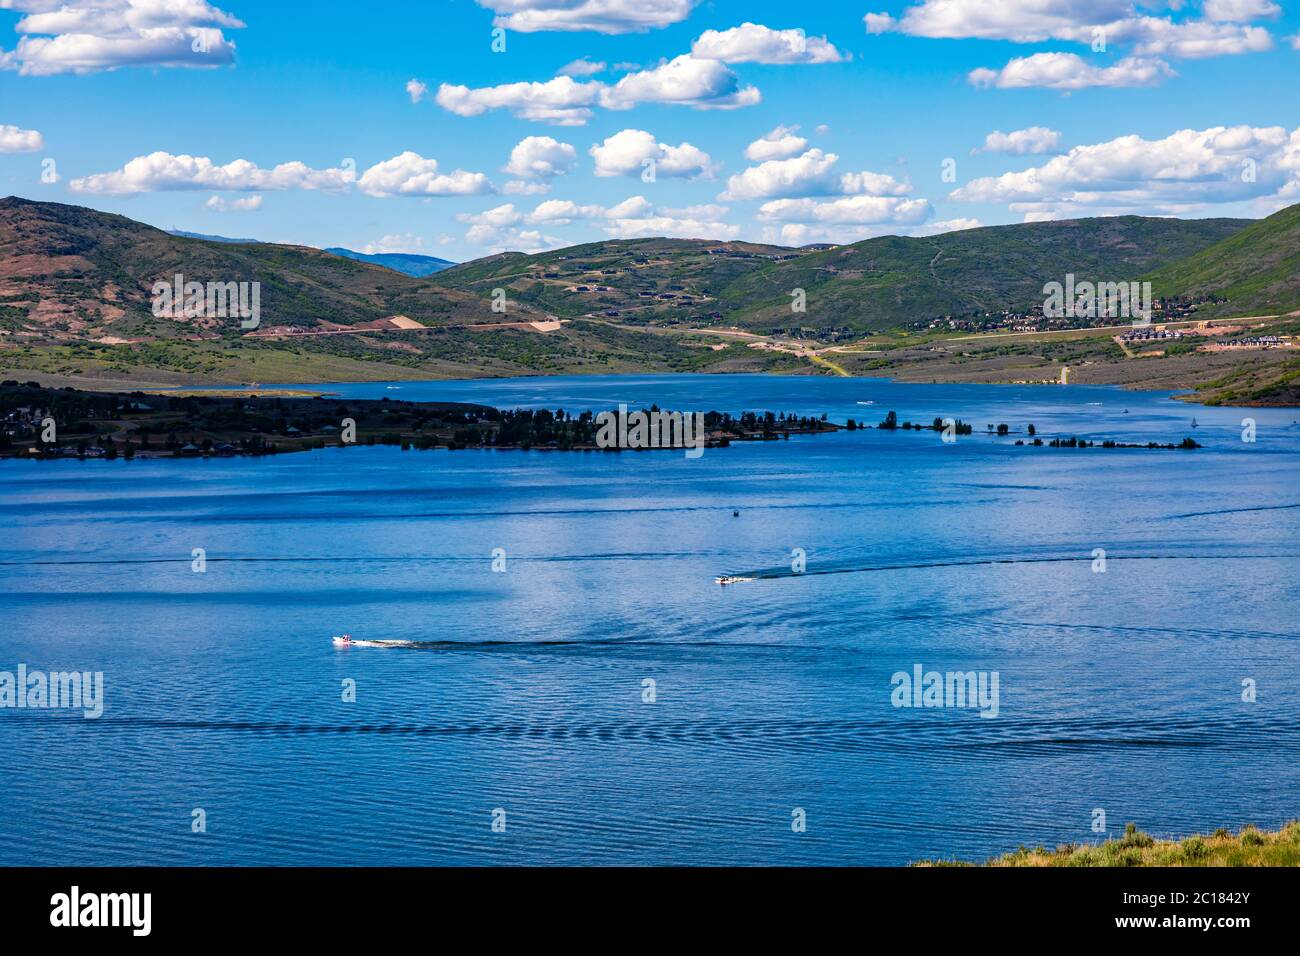 This is an overview of scenic Jordanelle Reservoir and State Park near Heber City, Wasatch County, Utah, USA. Stock Photo